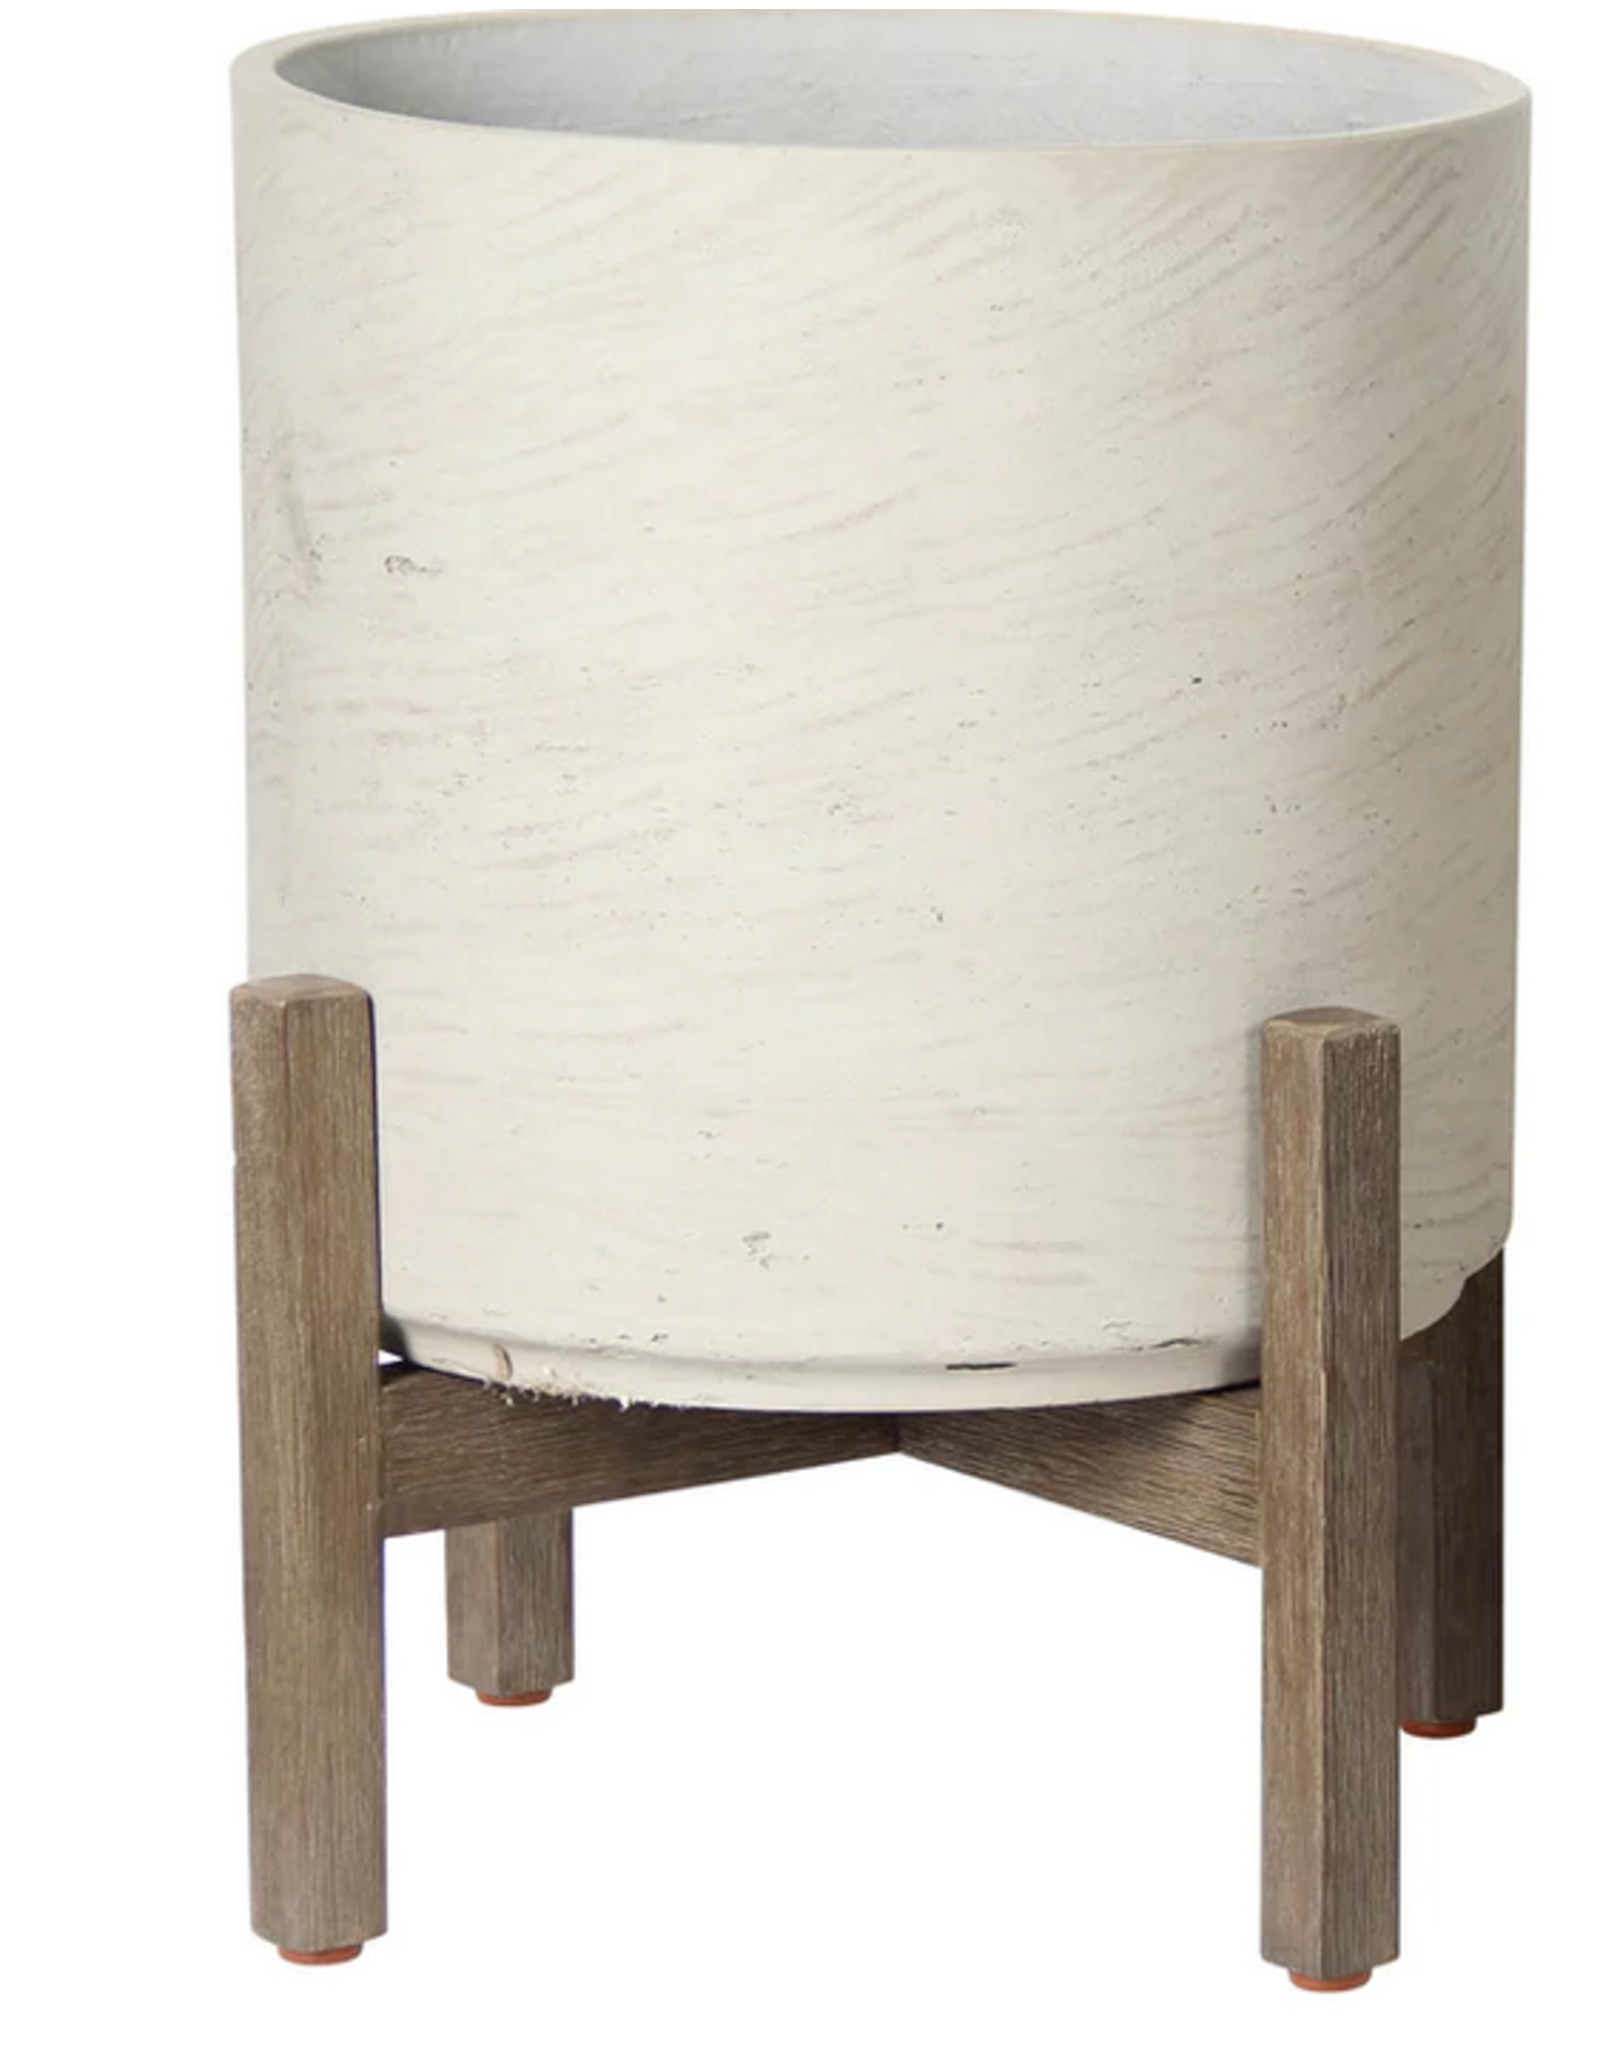 Patio Round Large Standing Pot - White Wash